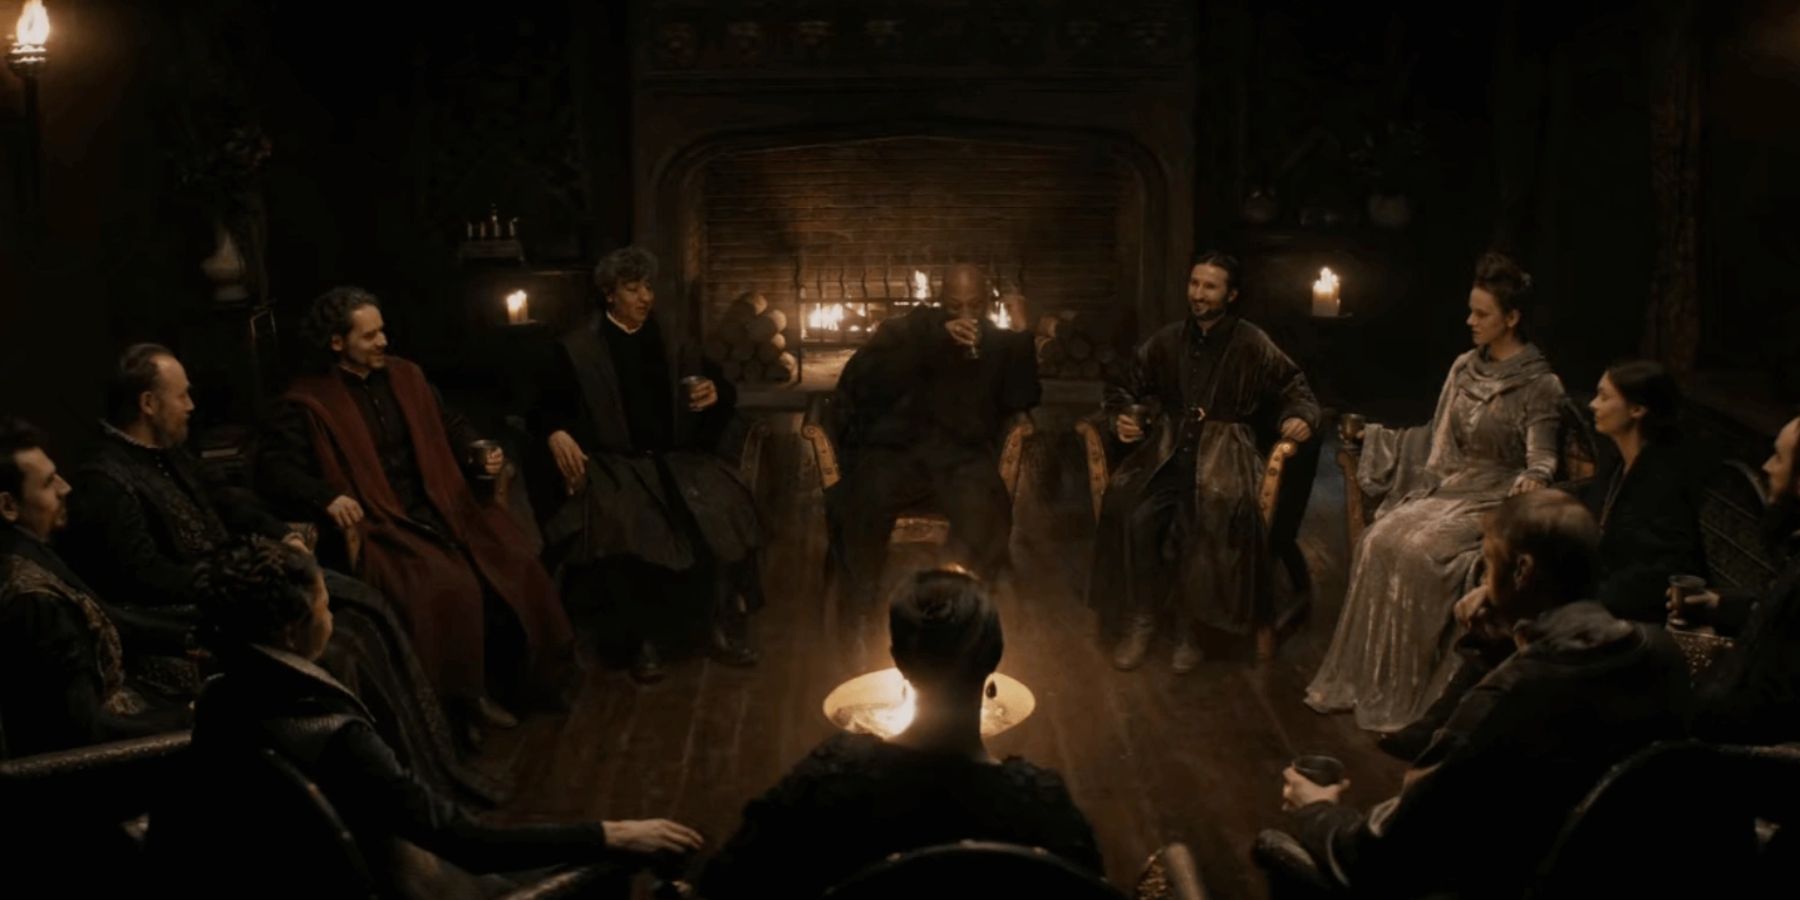 The Witcher season 1's Council of Wizards